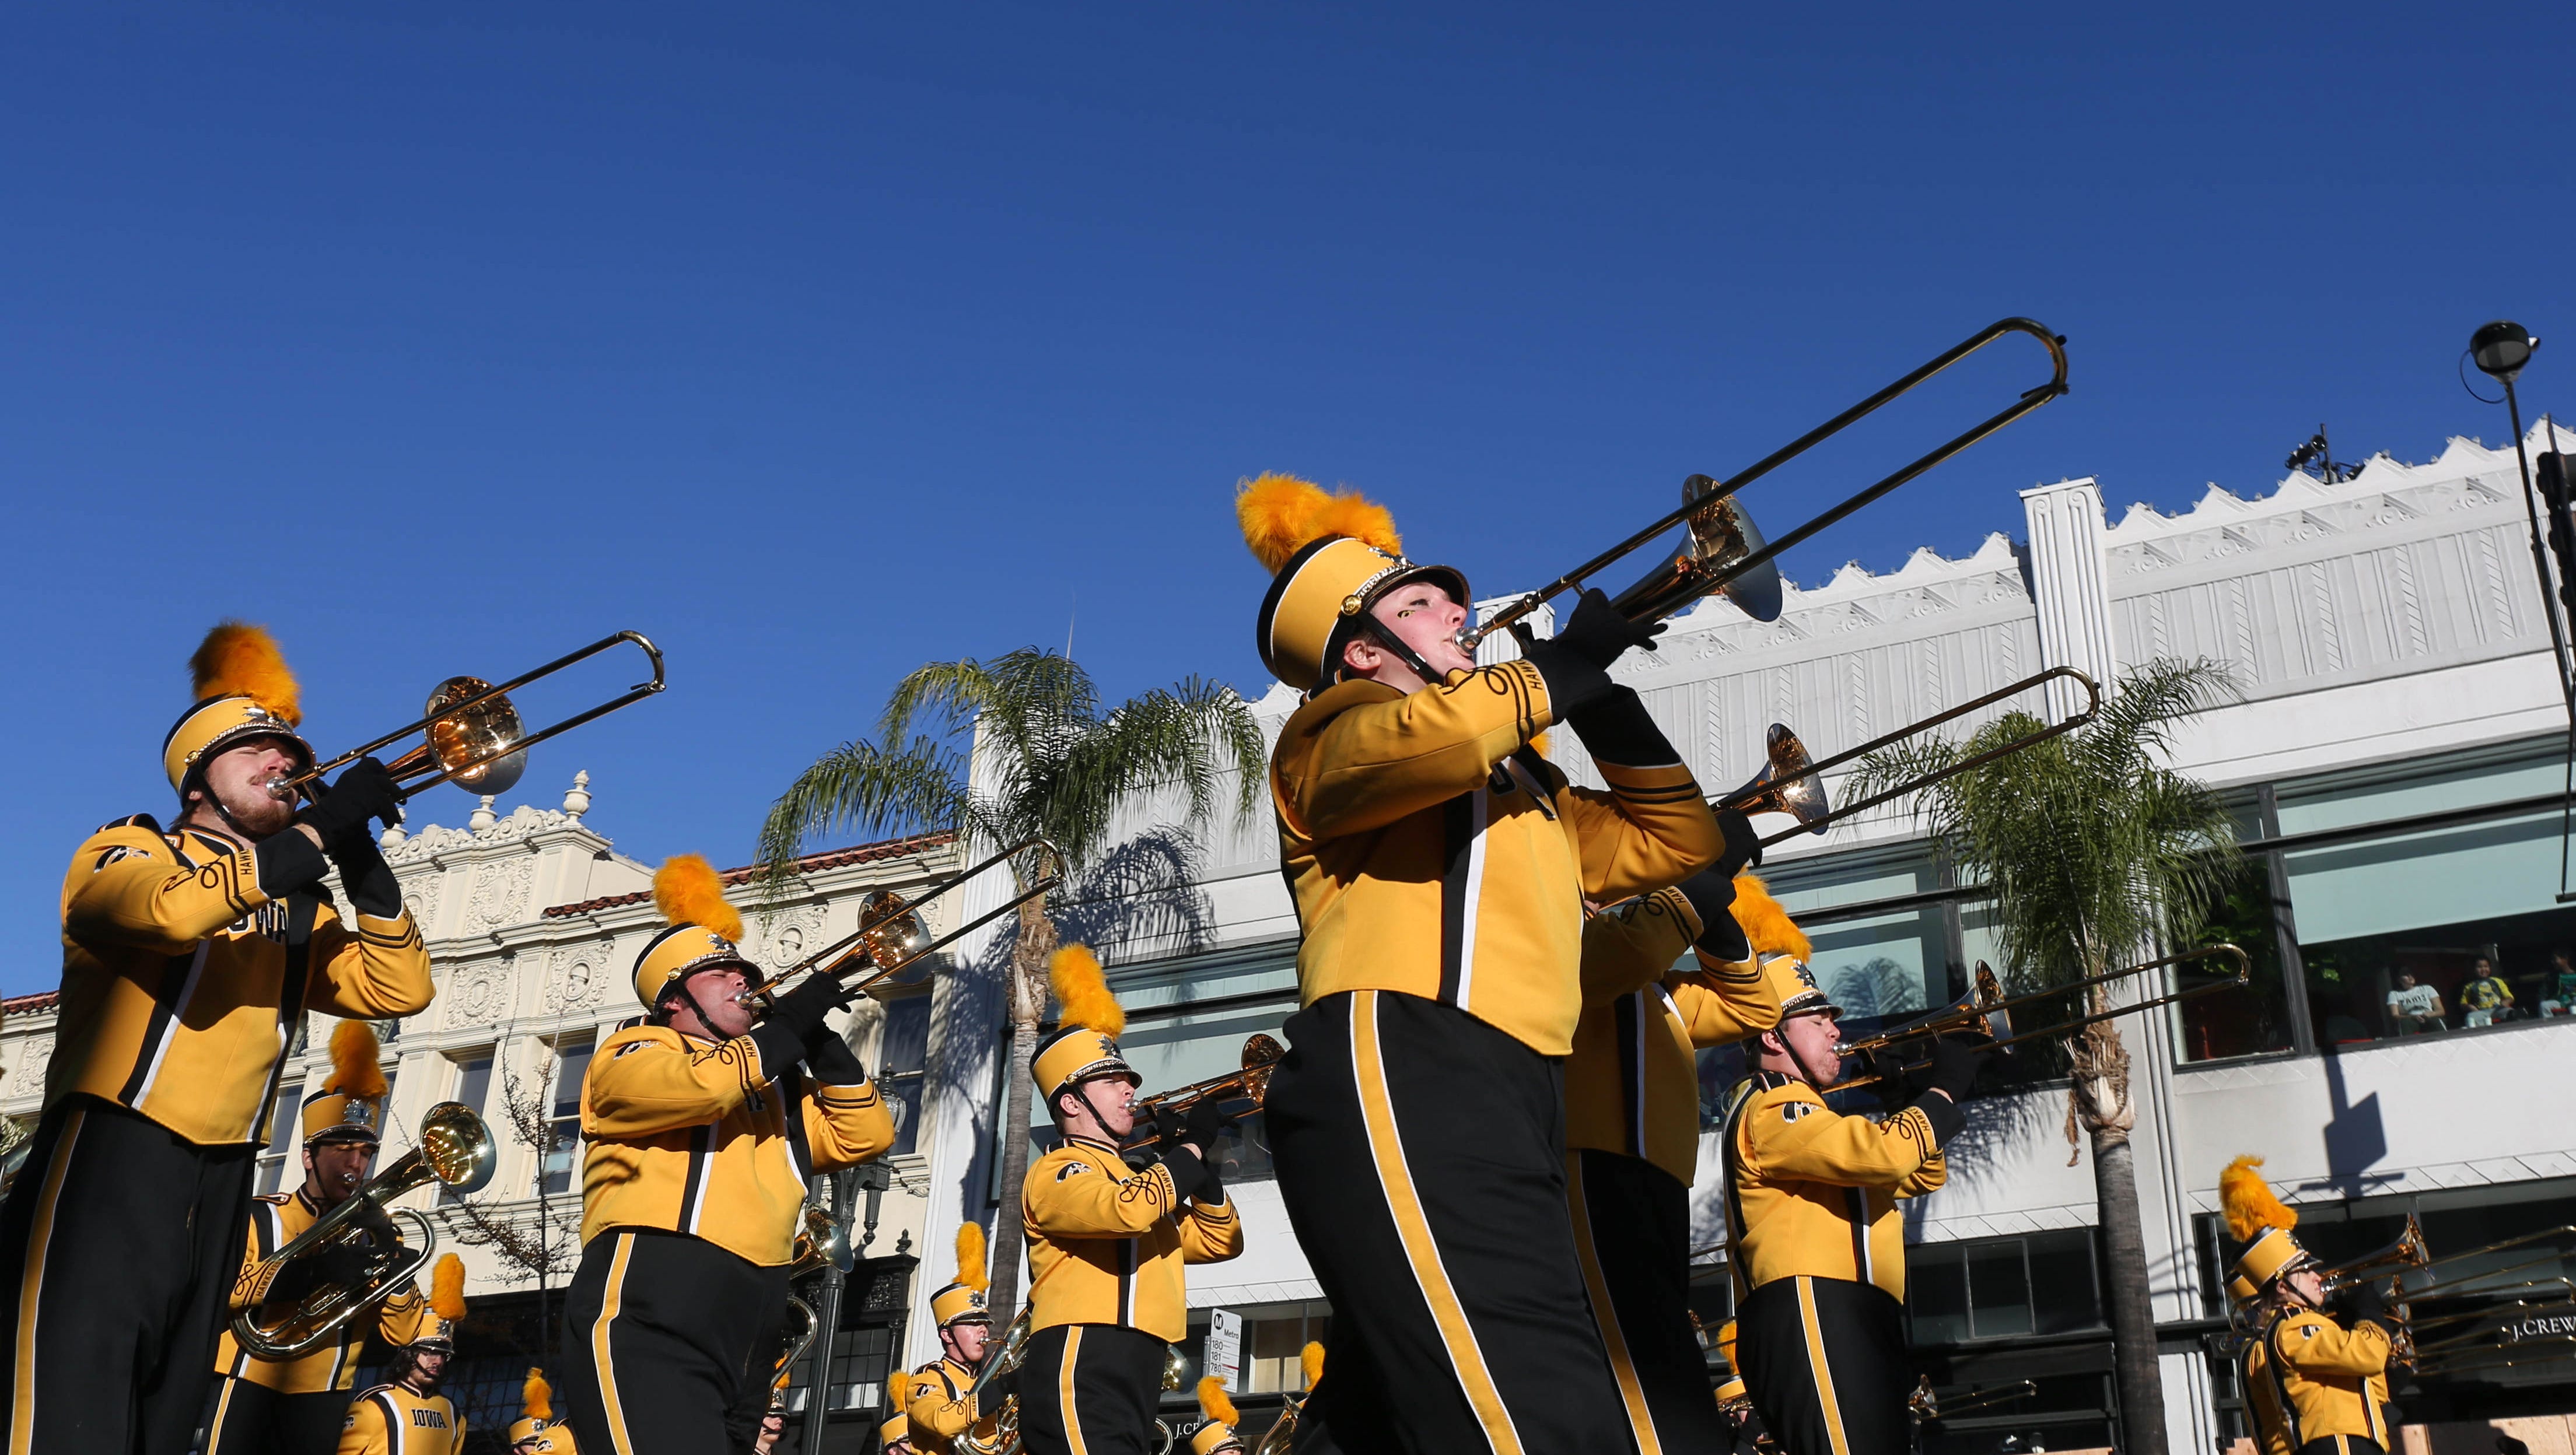 Members of the University of Iowa Marching Band perform as they march along Colorado Blvd. on Friday, Jan. 1, 2016, during the 2016 Tournament of Roses Parade in Pasadena, Calif.